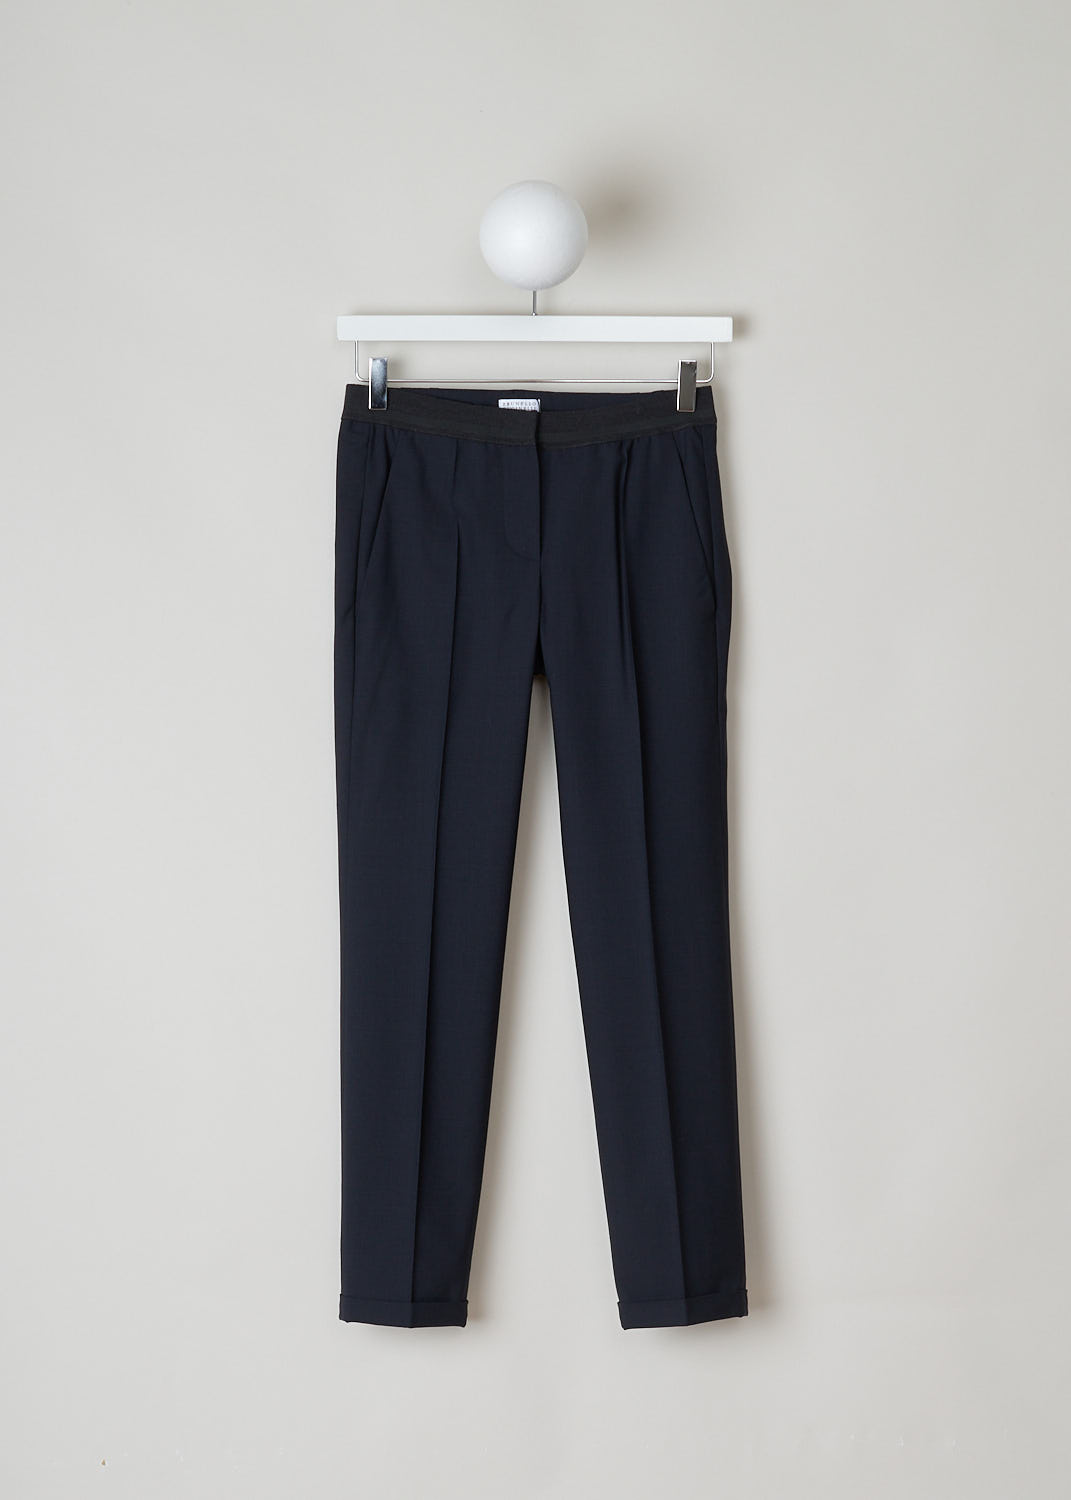 BRUNELLO CUCINELLI, NAVY BLUE PANTS WITH PARTY ELASTICATED WAISTBAND, M0W07P1500_C060, Blue, Front, Navy blue pants with partly elasticated waistline. A clasp and zipper function as the closing option. The pants feature forward slanted pockets in the front, and two buttoned welt pockets in the back. Along the length of the pant leg, centre creases can be found. These pants have a folded hem.
